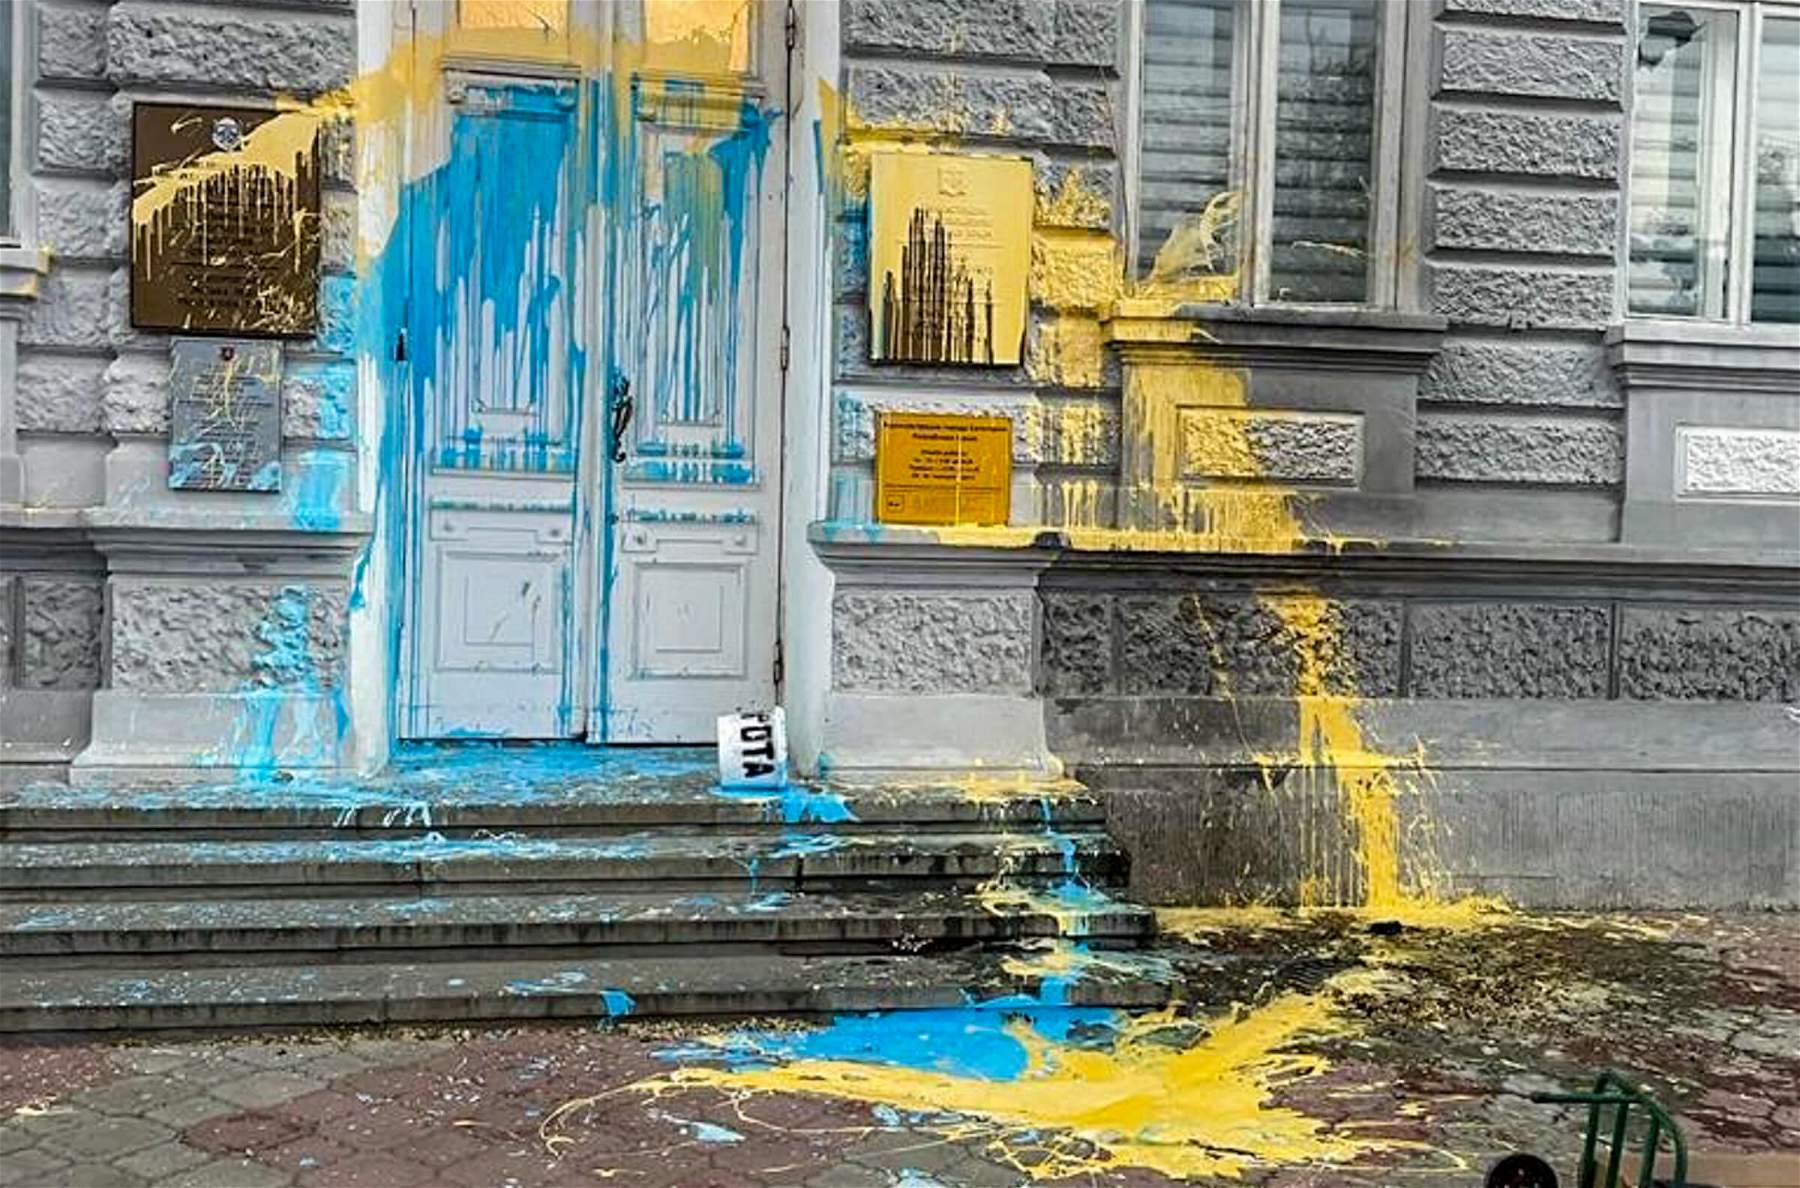 Russia, 15-year jail term for street artist who daubed city hall in protest of war